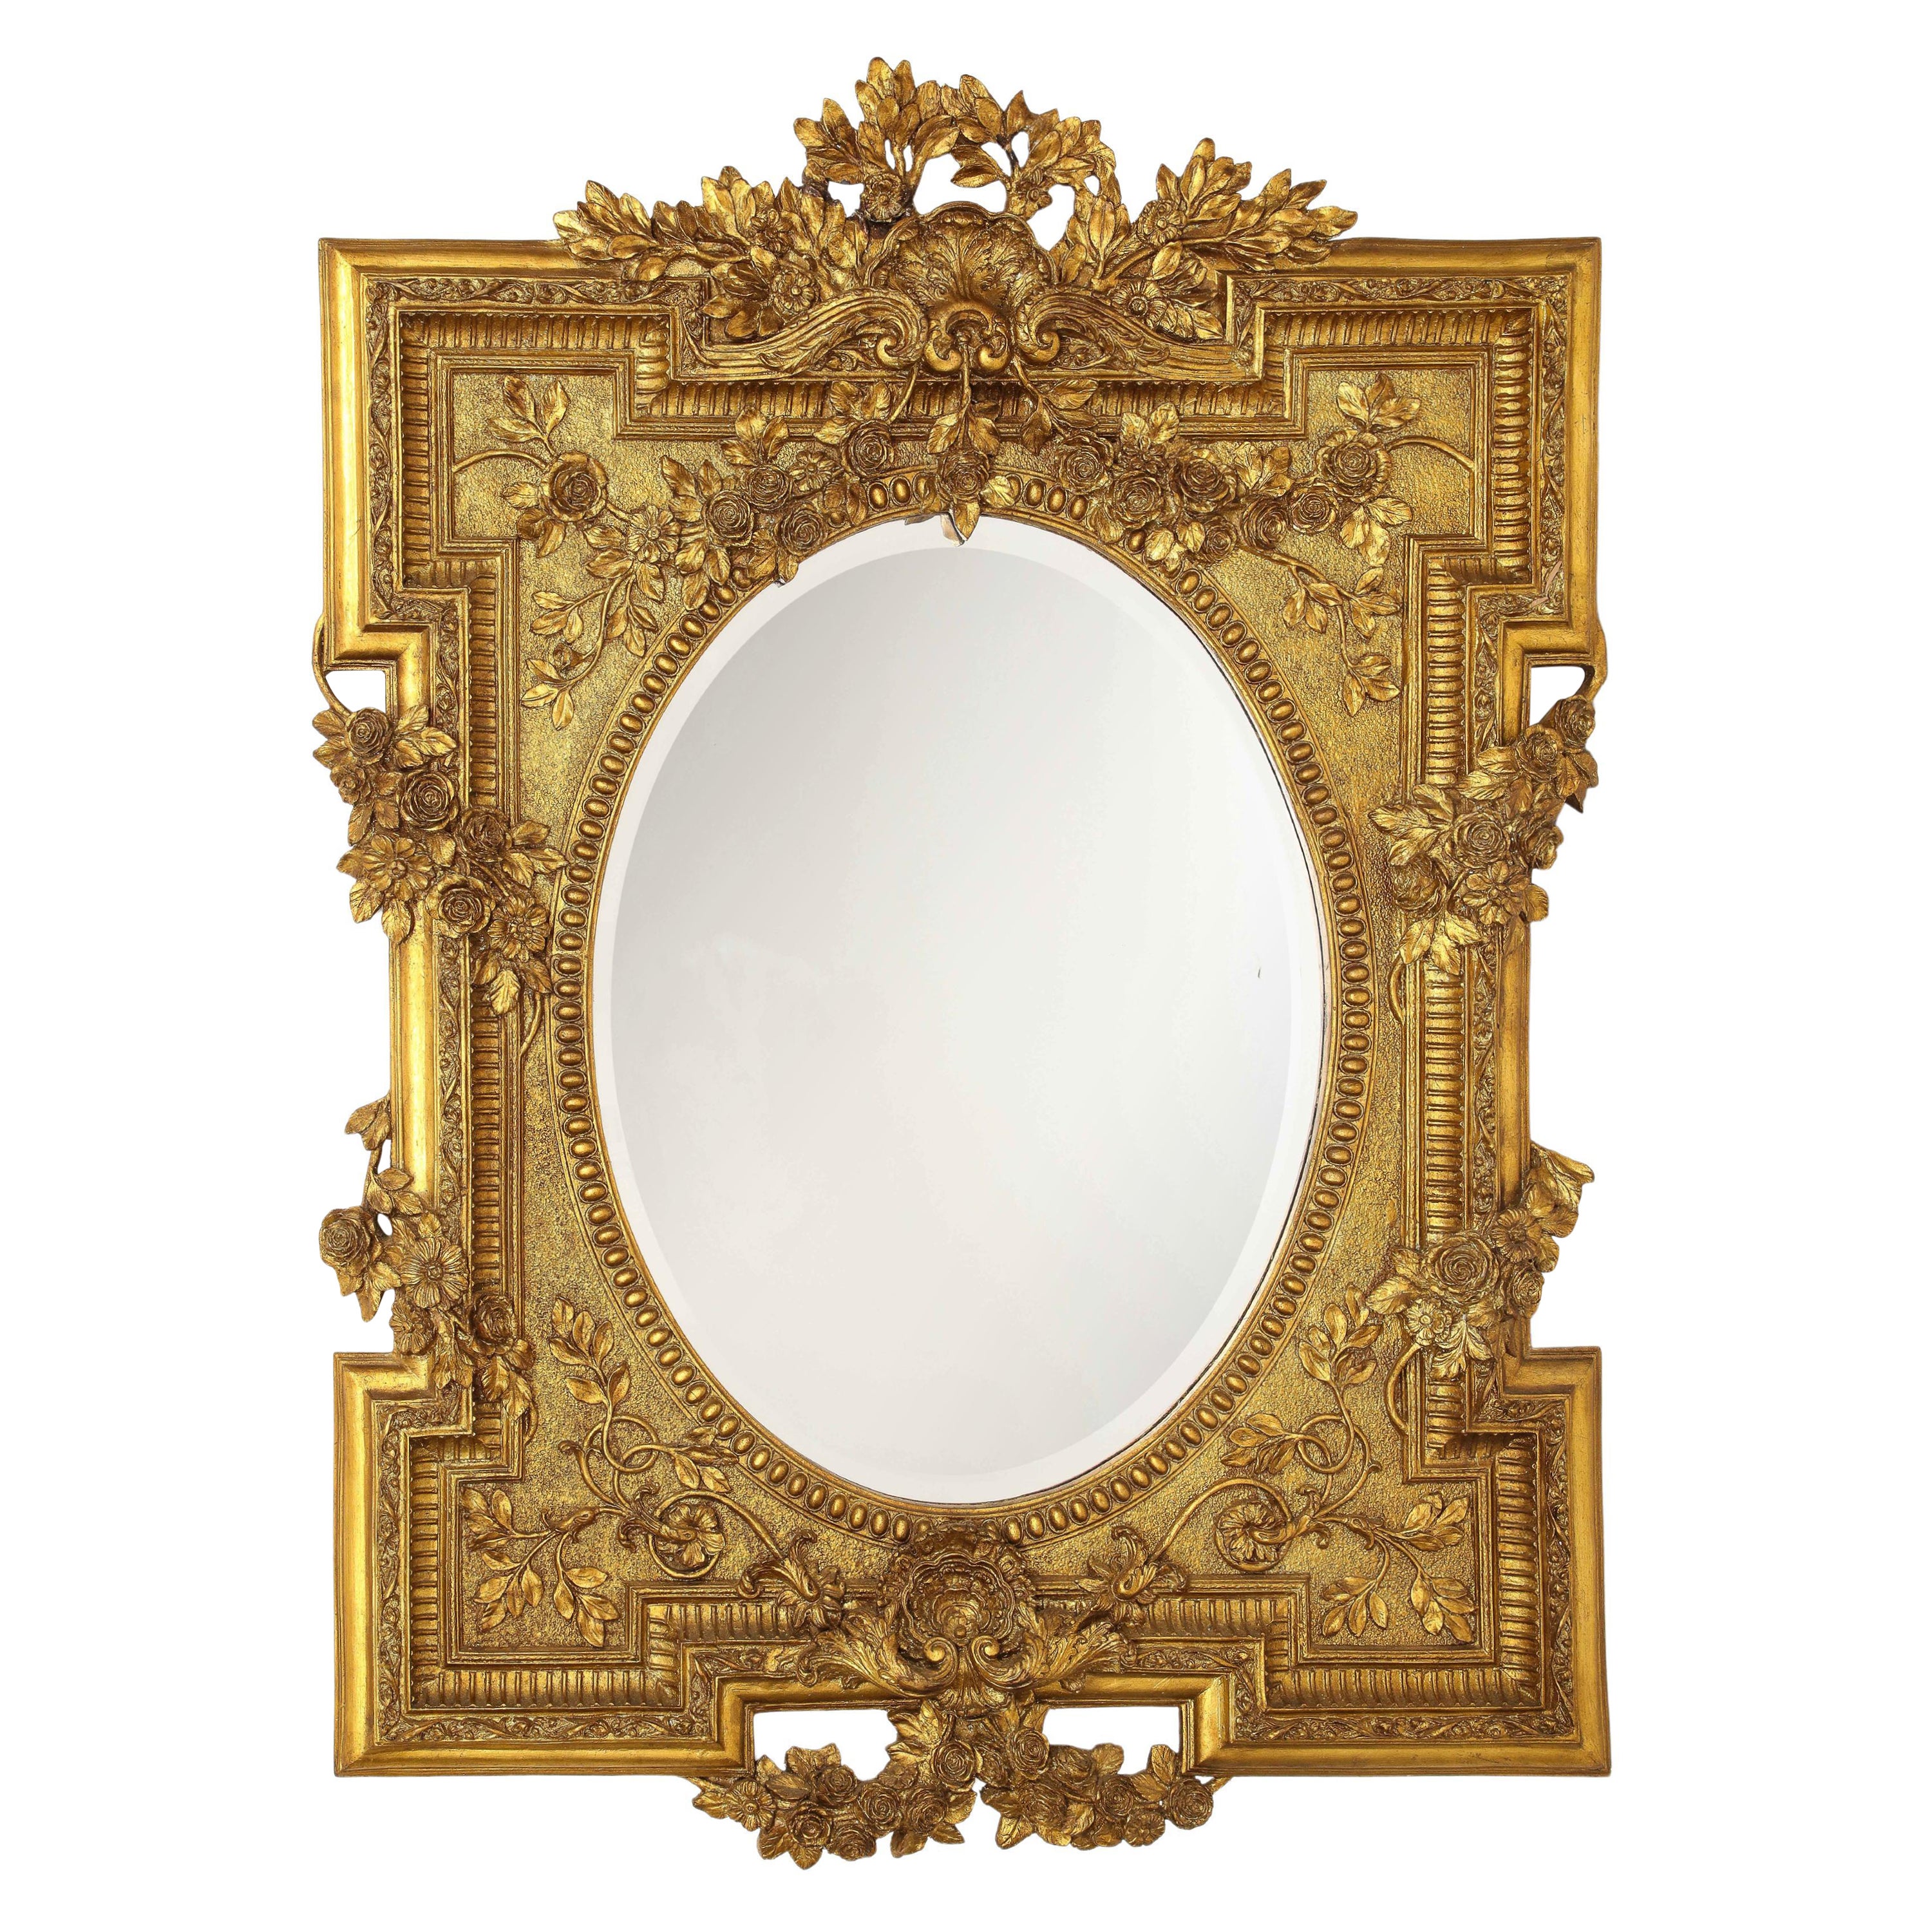 Marvelous French Giltwood Hand-Carved Beveled Mirror with Floral Vine Designs For Sale